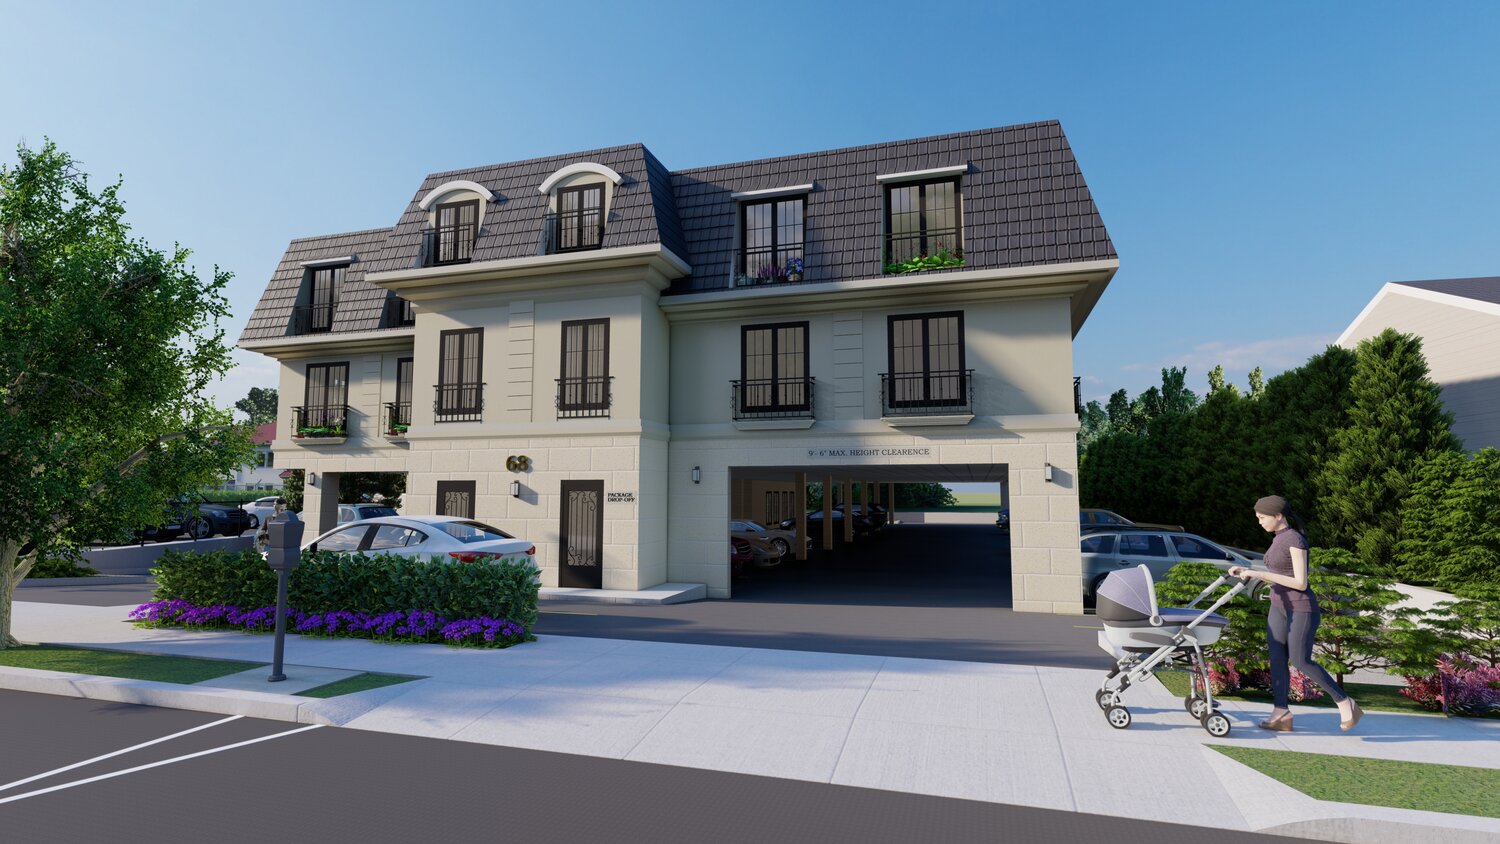 A rendering of the 17-apartment development that was proposed for the vacant property at 68 Washington Ave. in Cedarhurst.